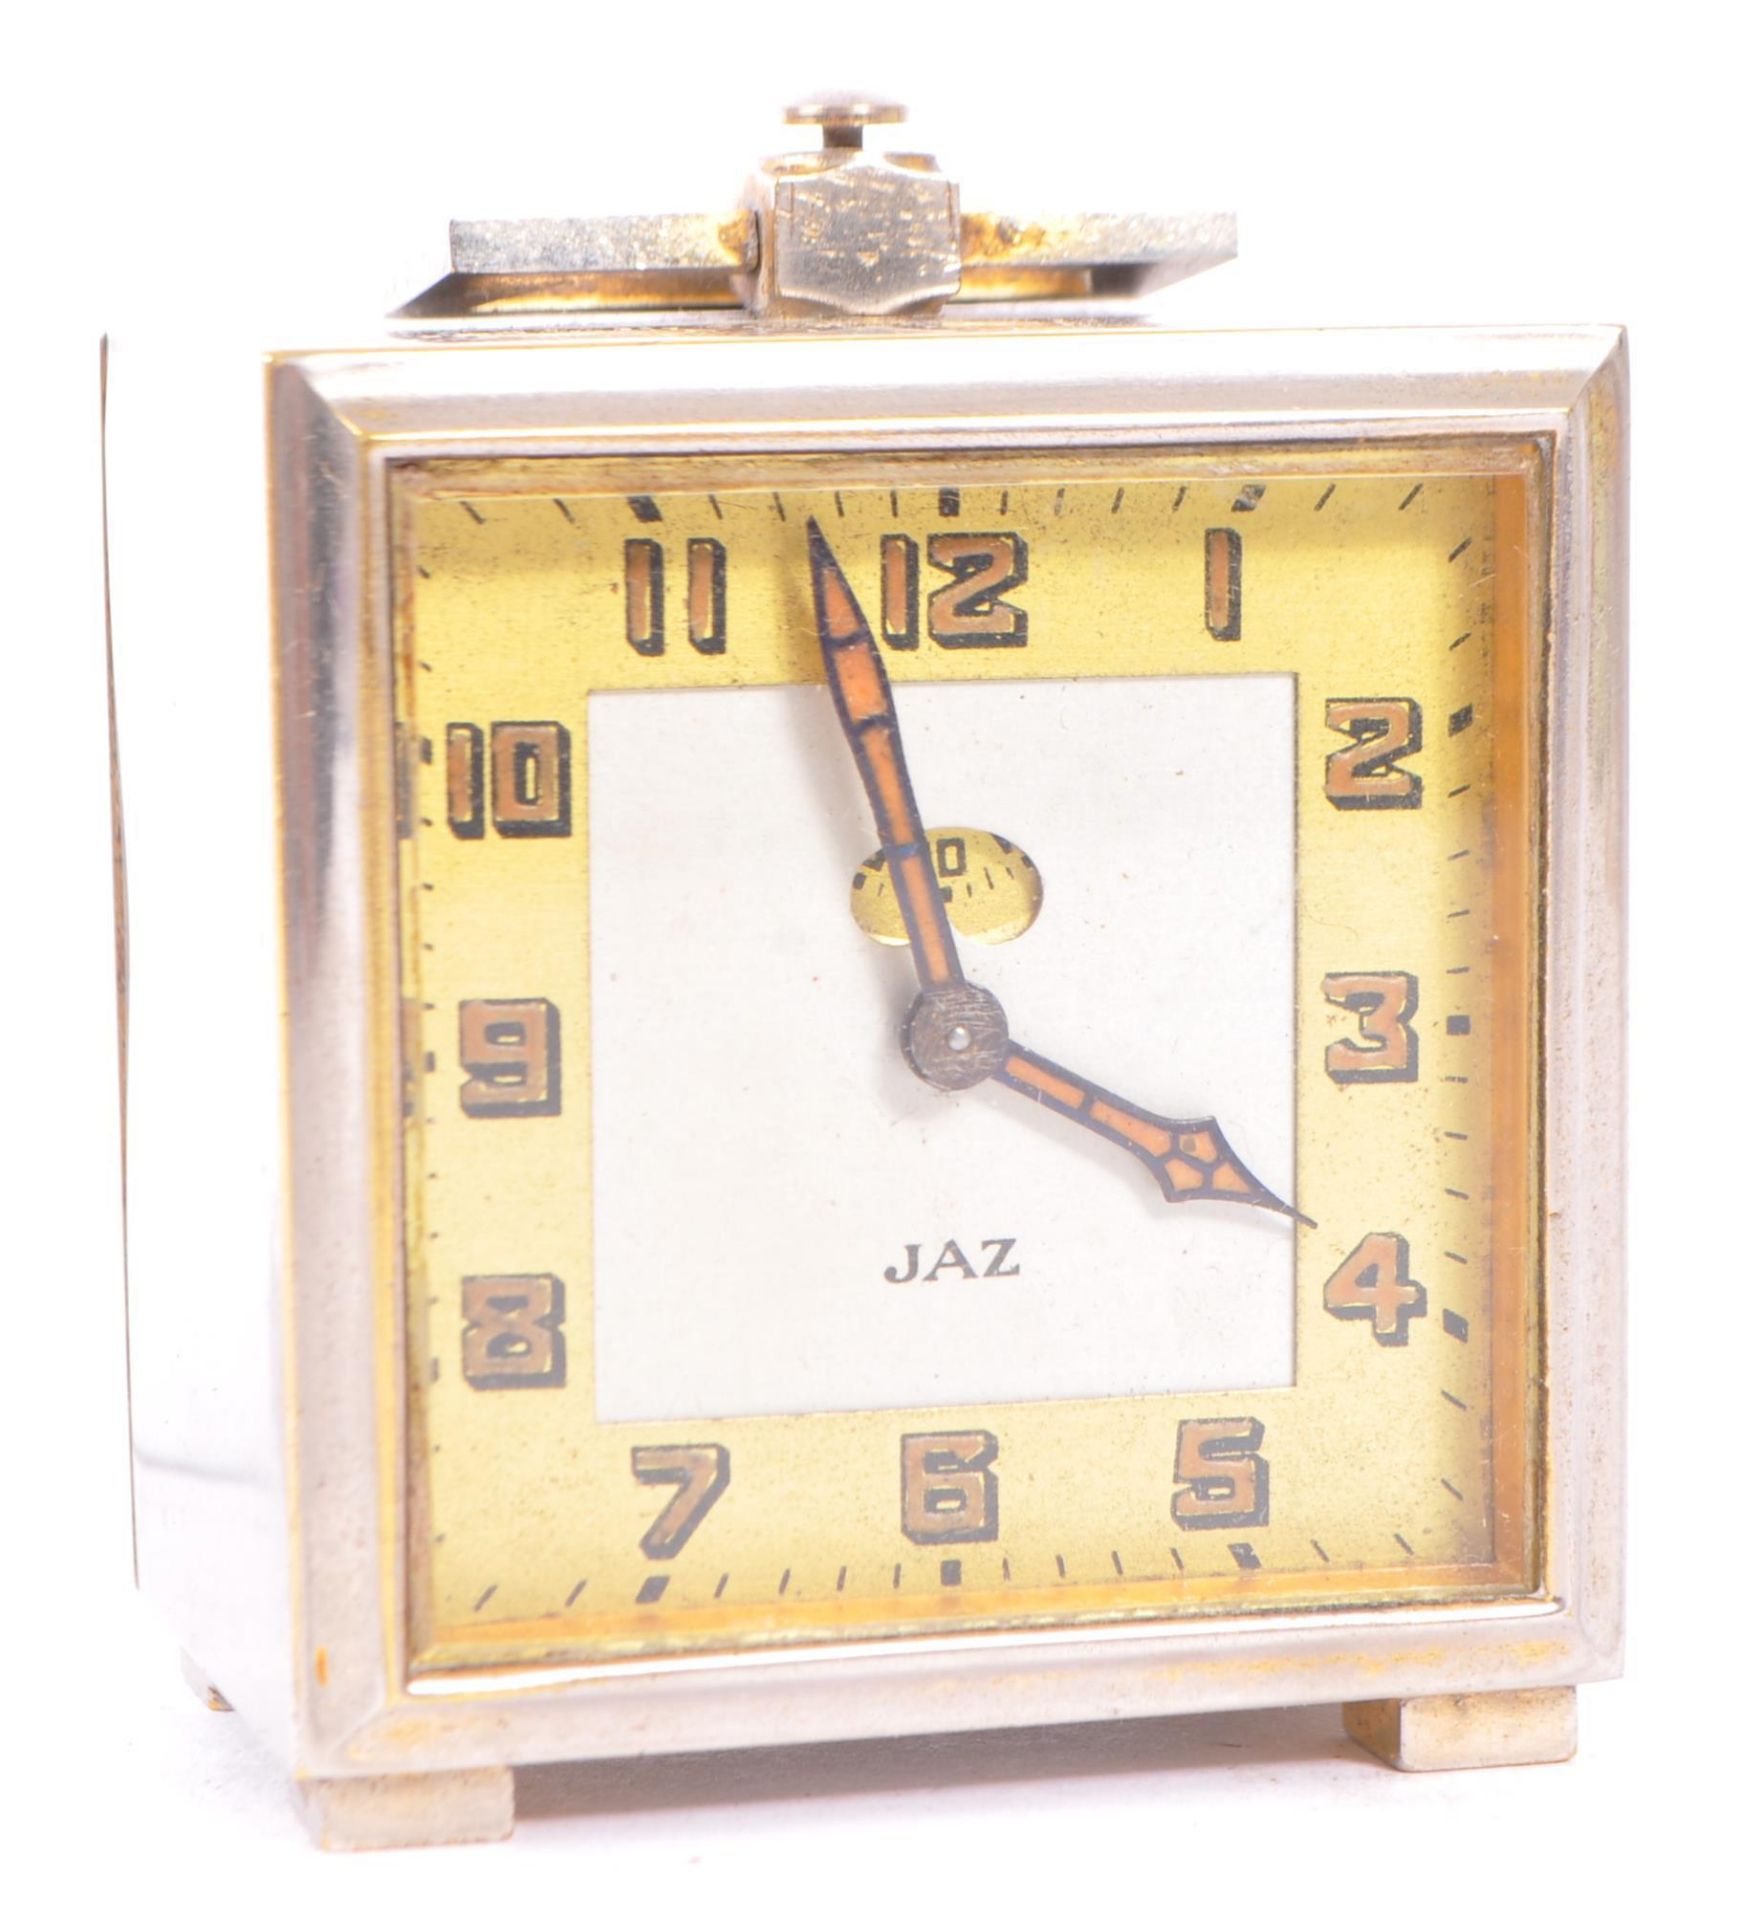 1930S ART DECO FRENCH TRAVEL CLOCK BY JAZ - Image 4 of 7